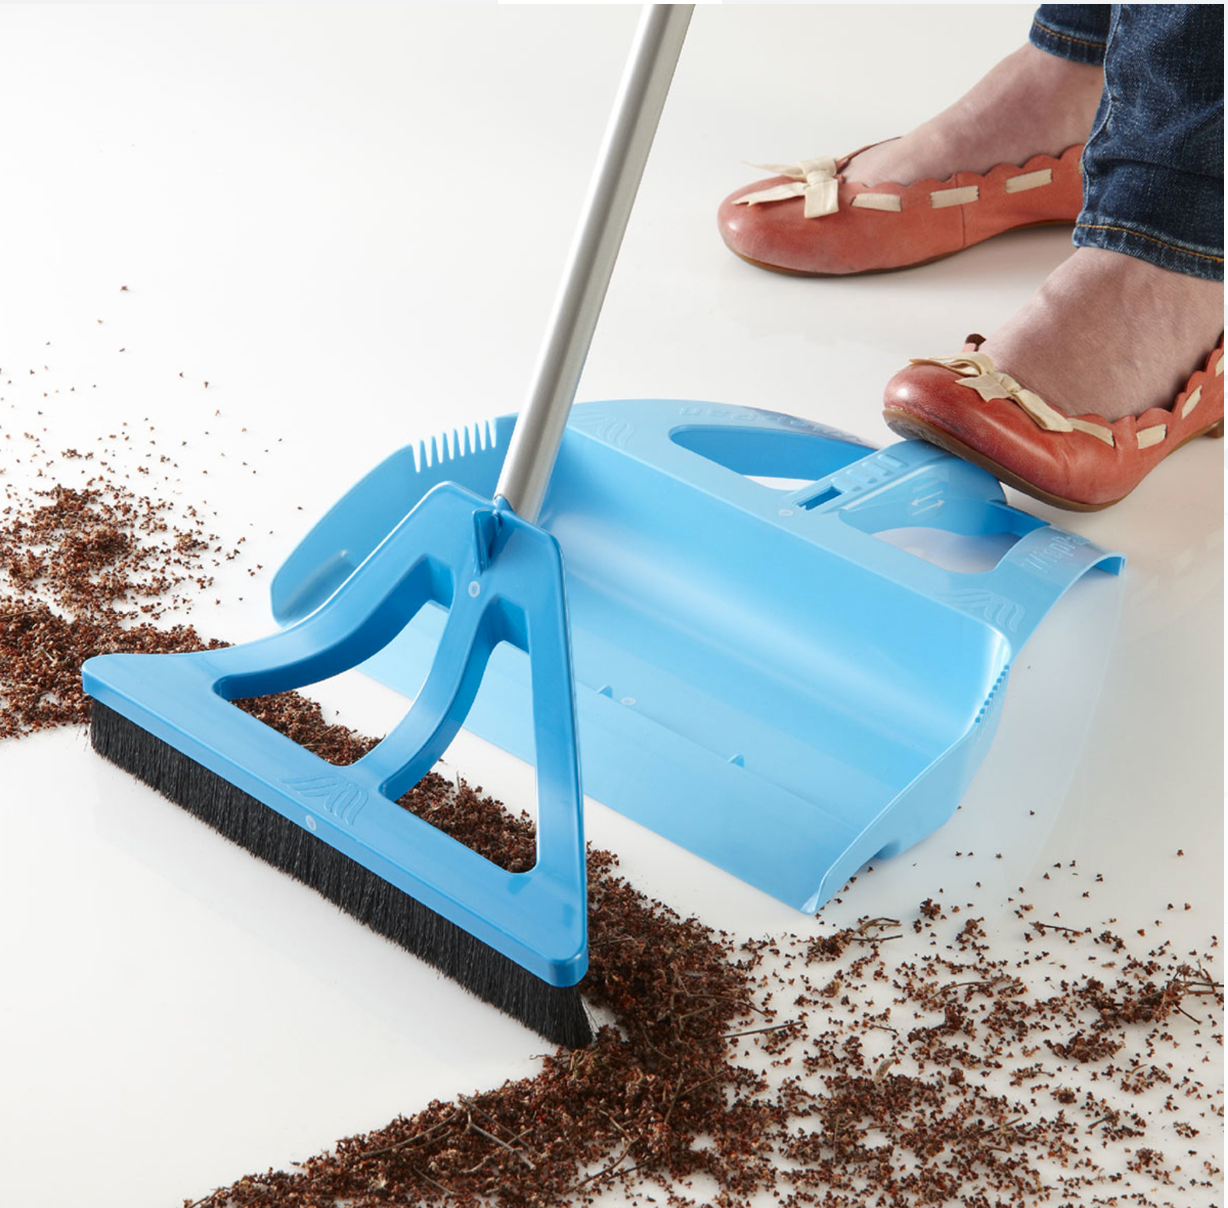 WISPsystem Best 90 Degree Angle One Handed Broom with Dustpan and Telescoping Handle with Bristle Seal Technology, Blue